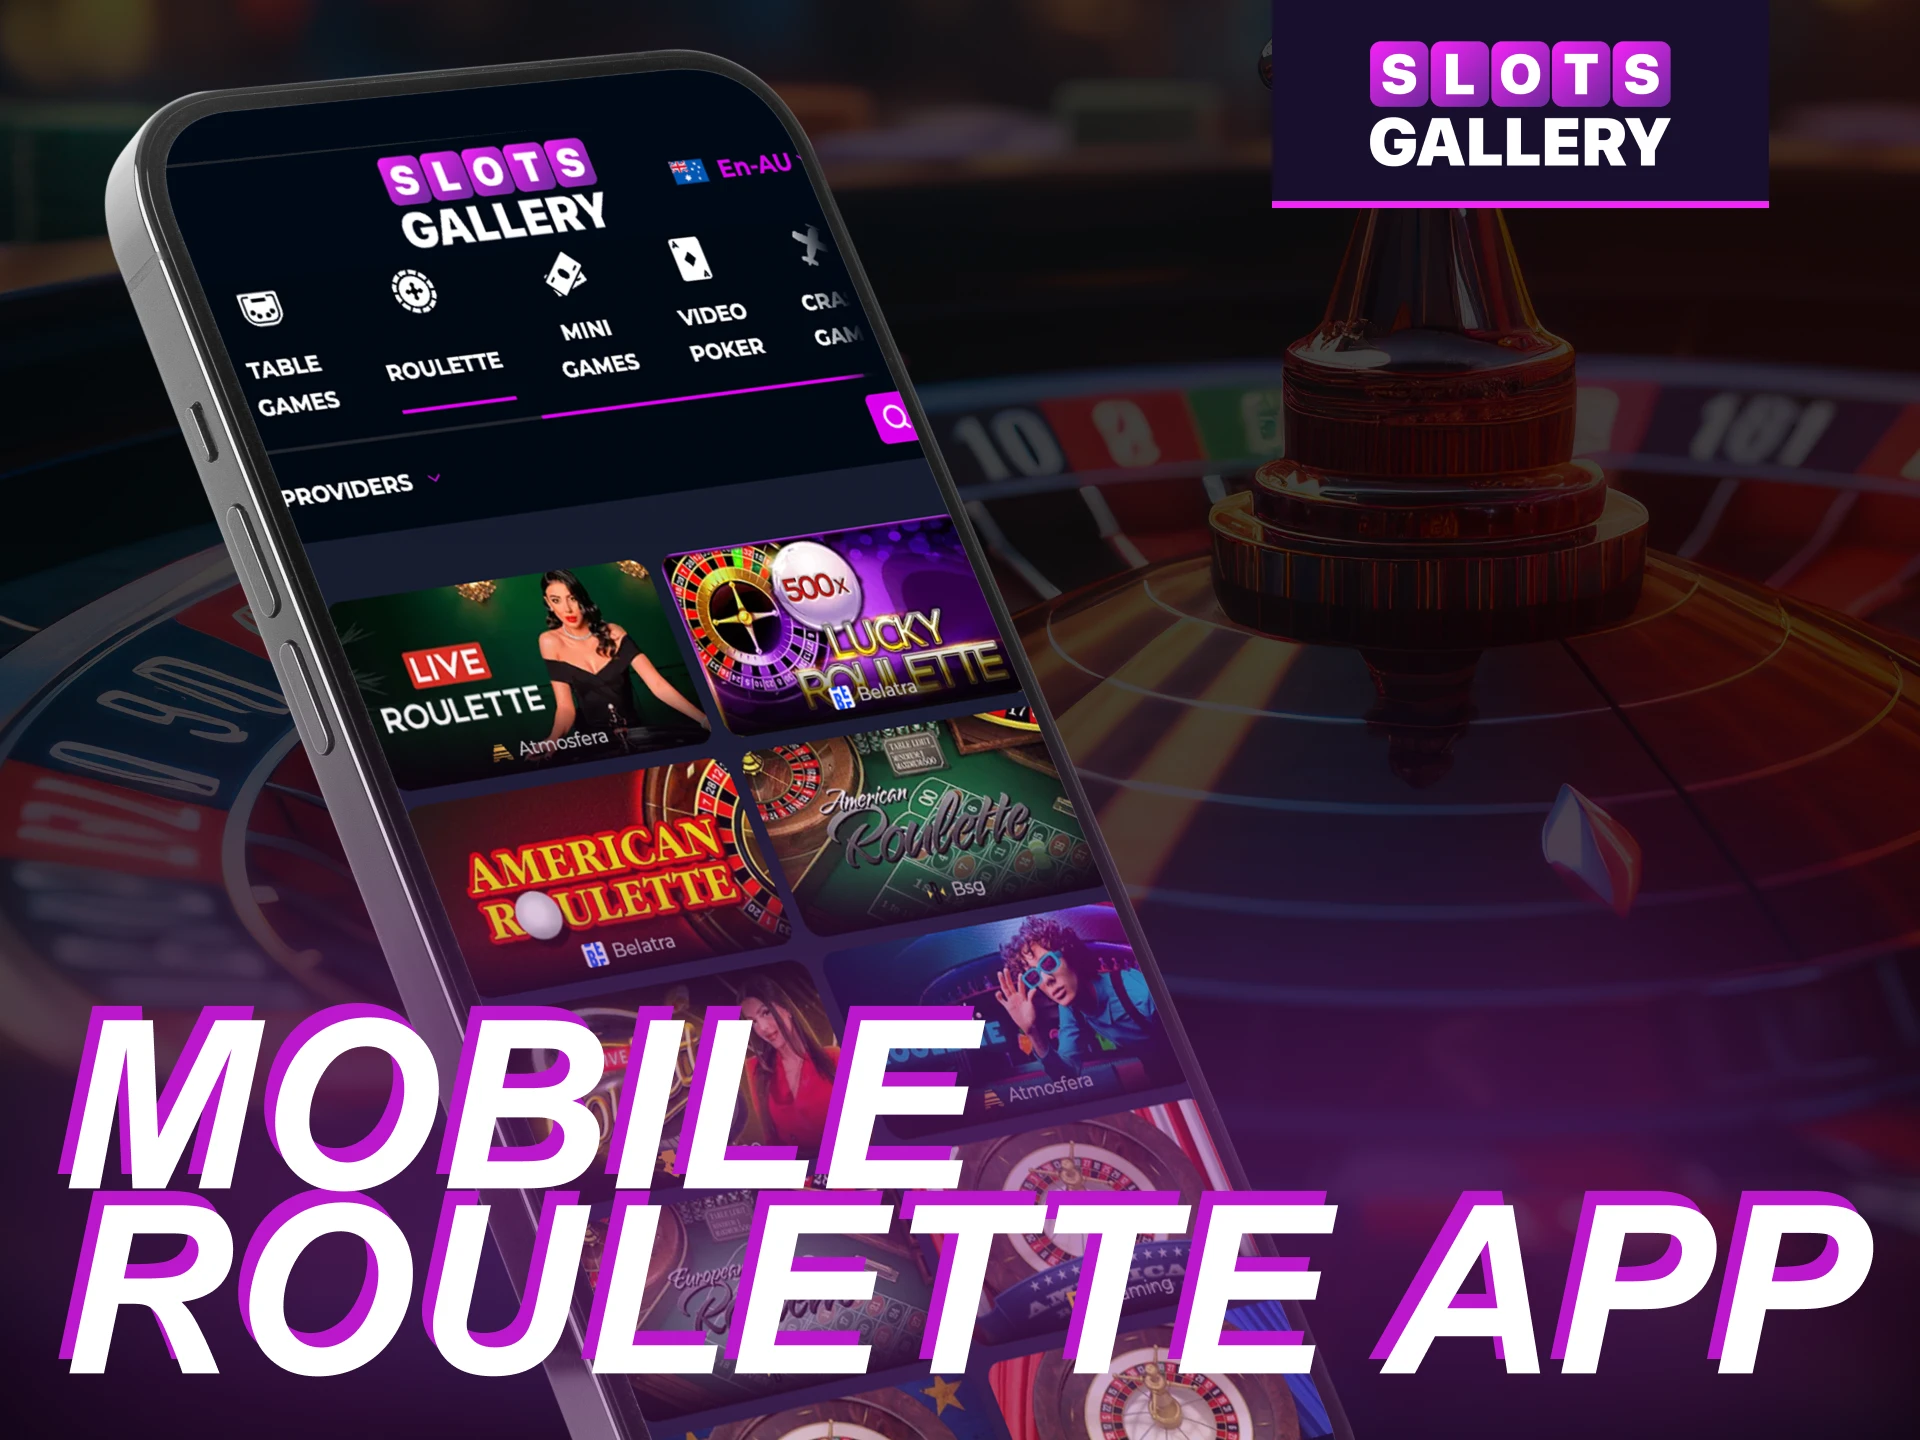 Are there roulette games in the mobile application of the Slots Gallery online casino.